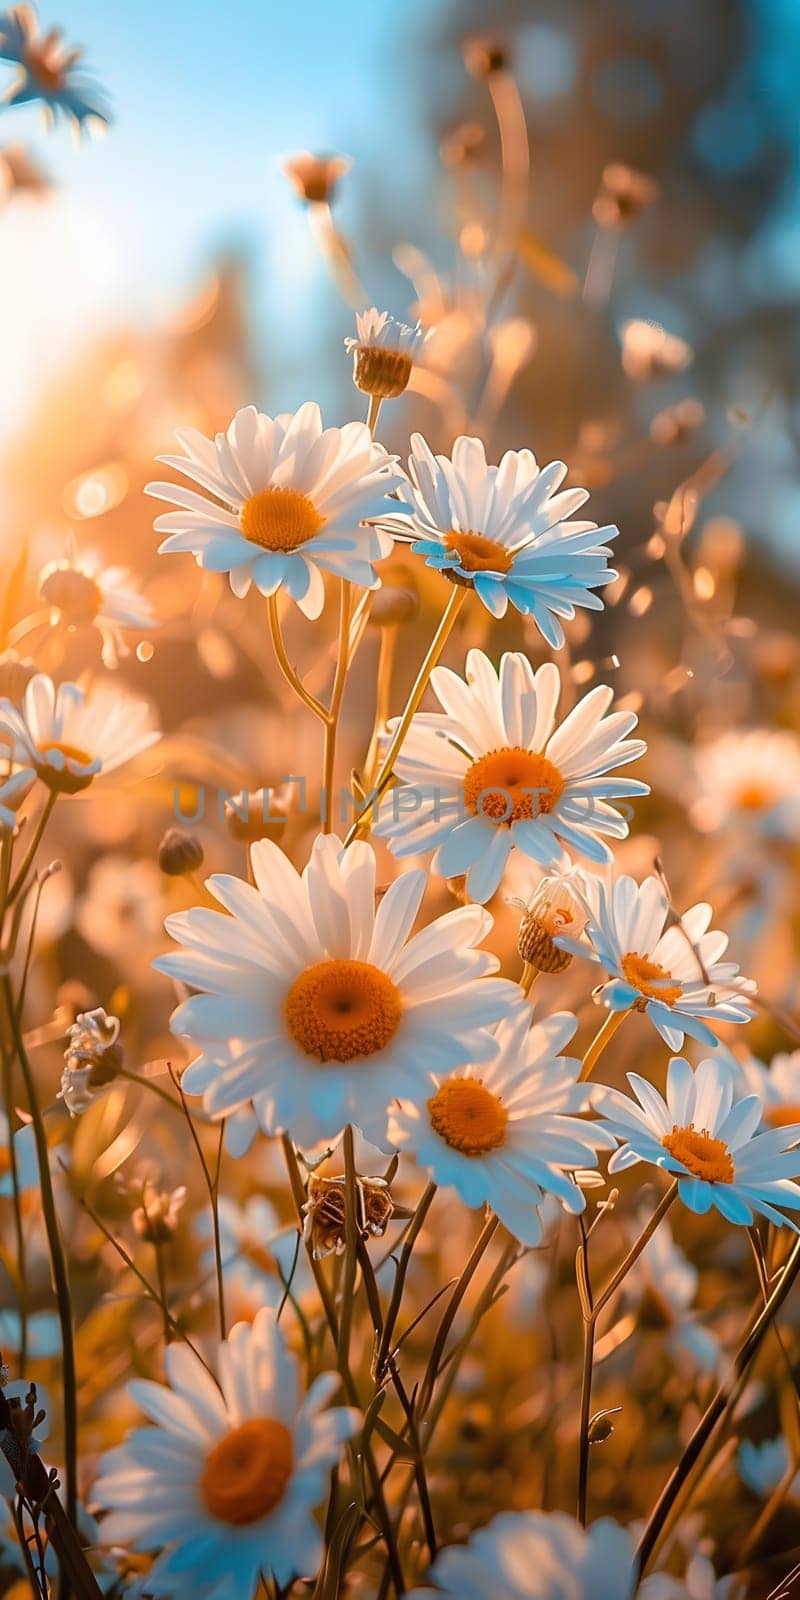 Field of daisies under the sun, petals glowing in azure and orange hues by Nadtochiy